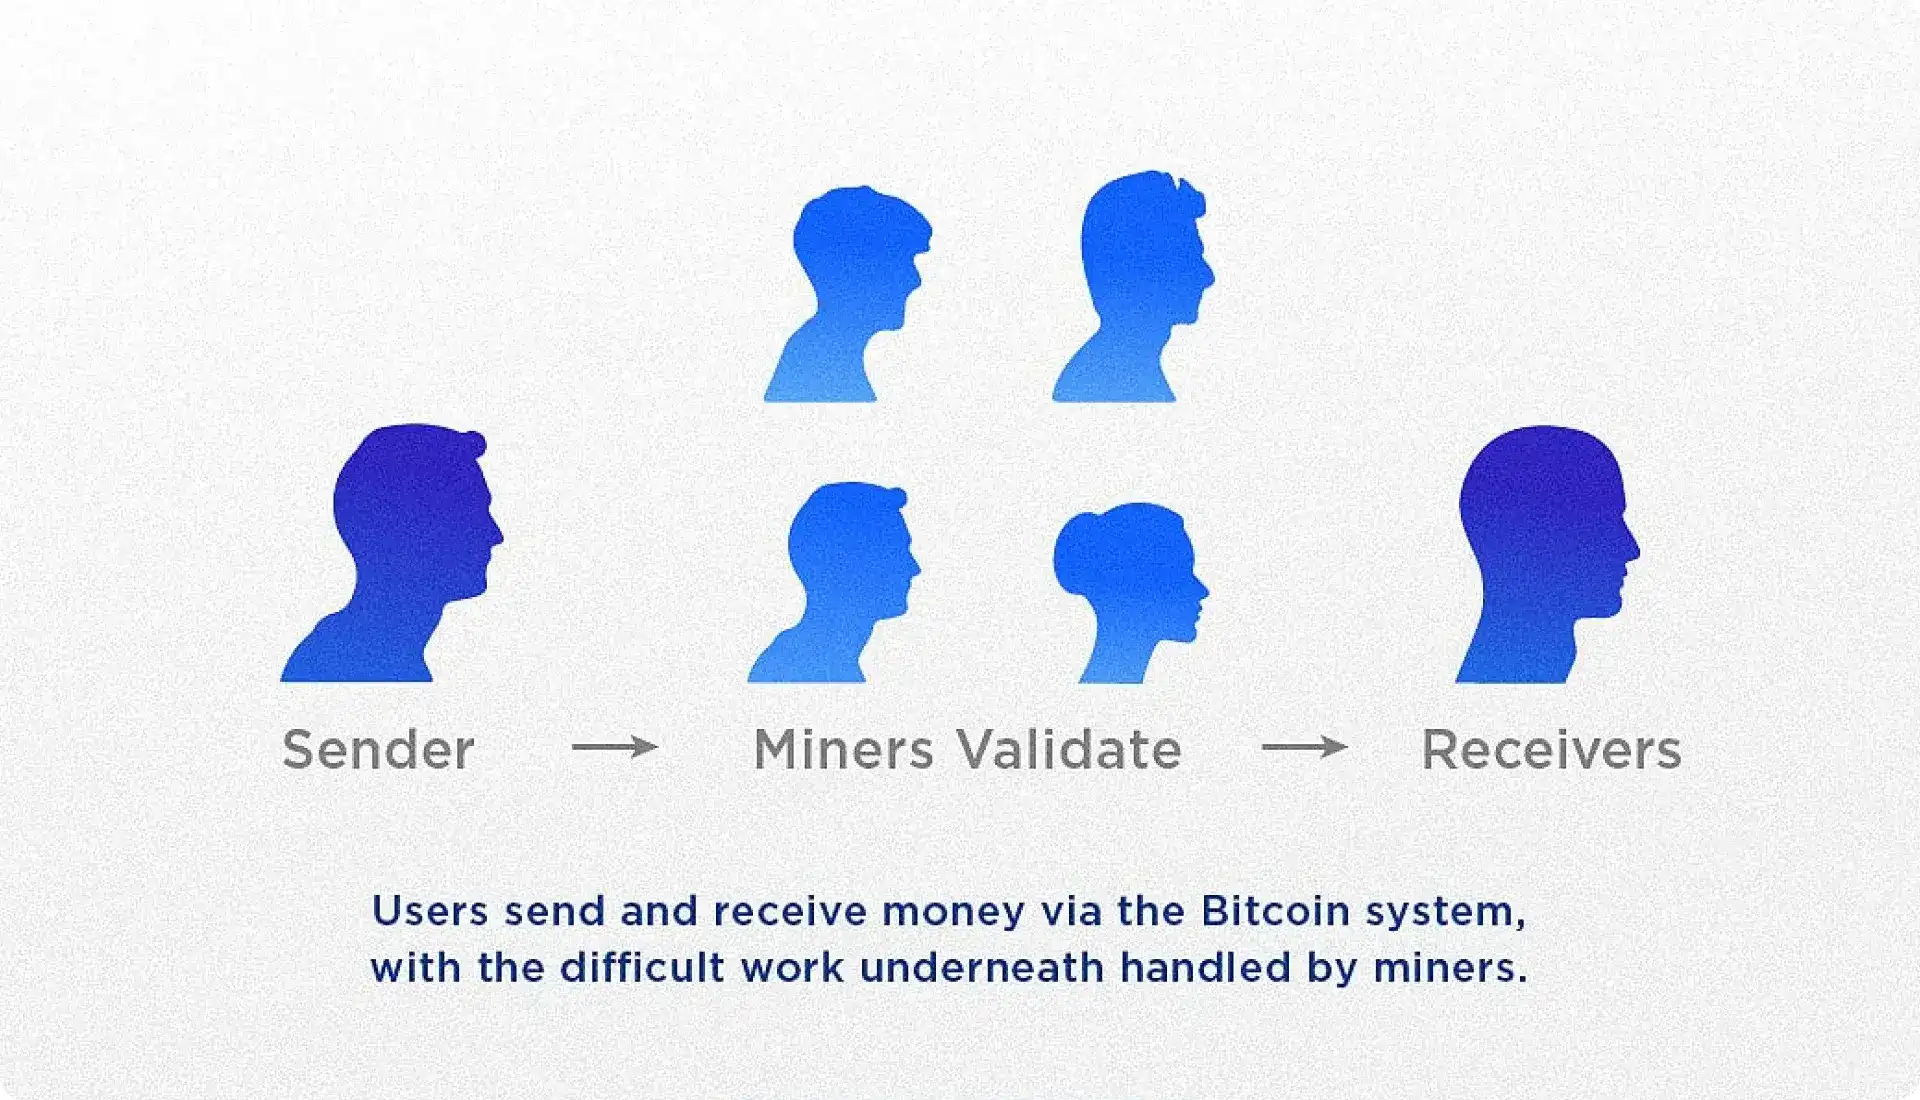 Infographic explaining Bitcoin's transaction process from sender to validation to receivers